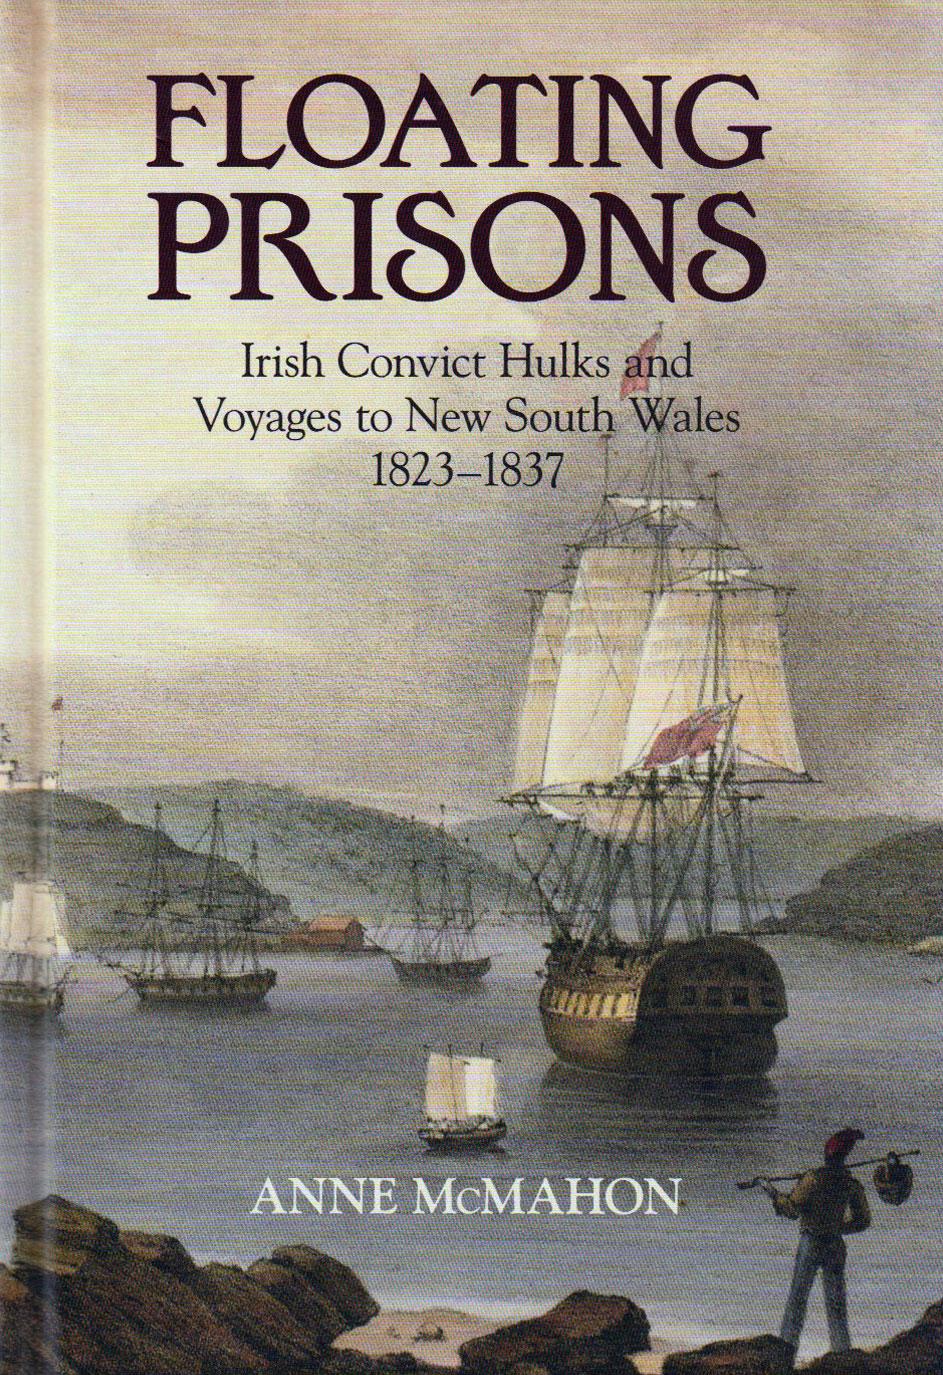 Floating Prisons - Irish Convict Hulks and Voyages to New South Wales 1823-1837